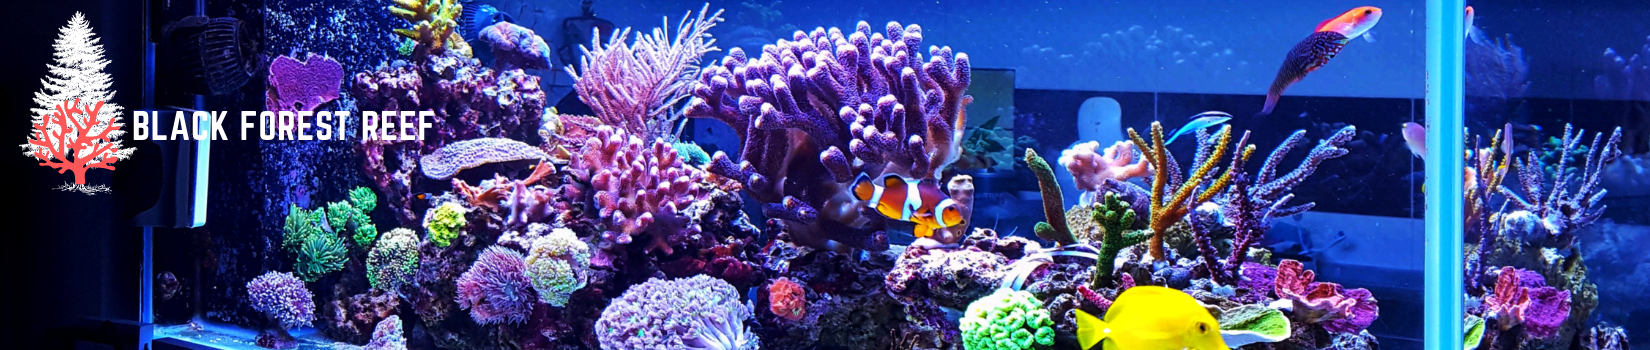 Black Forest Reef